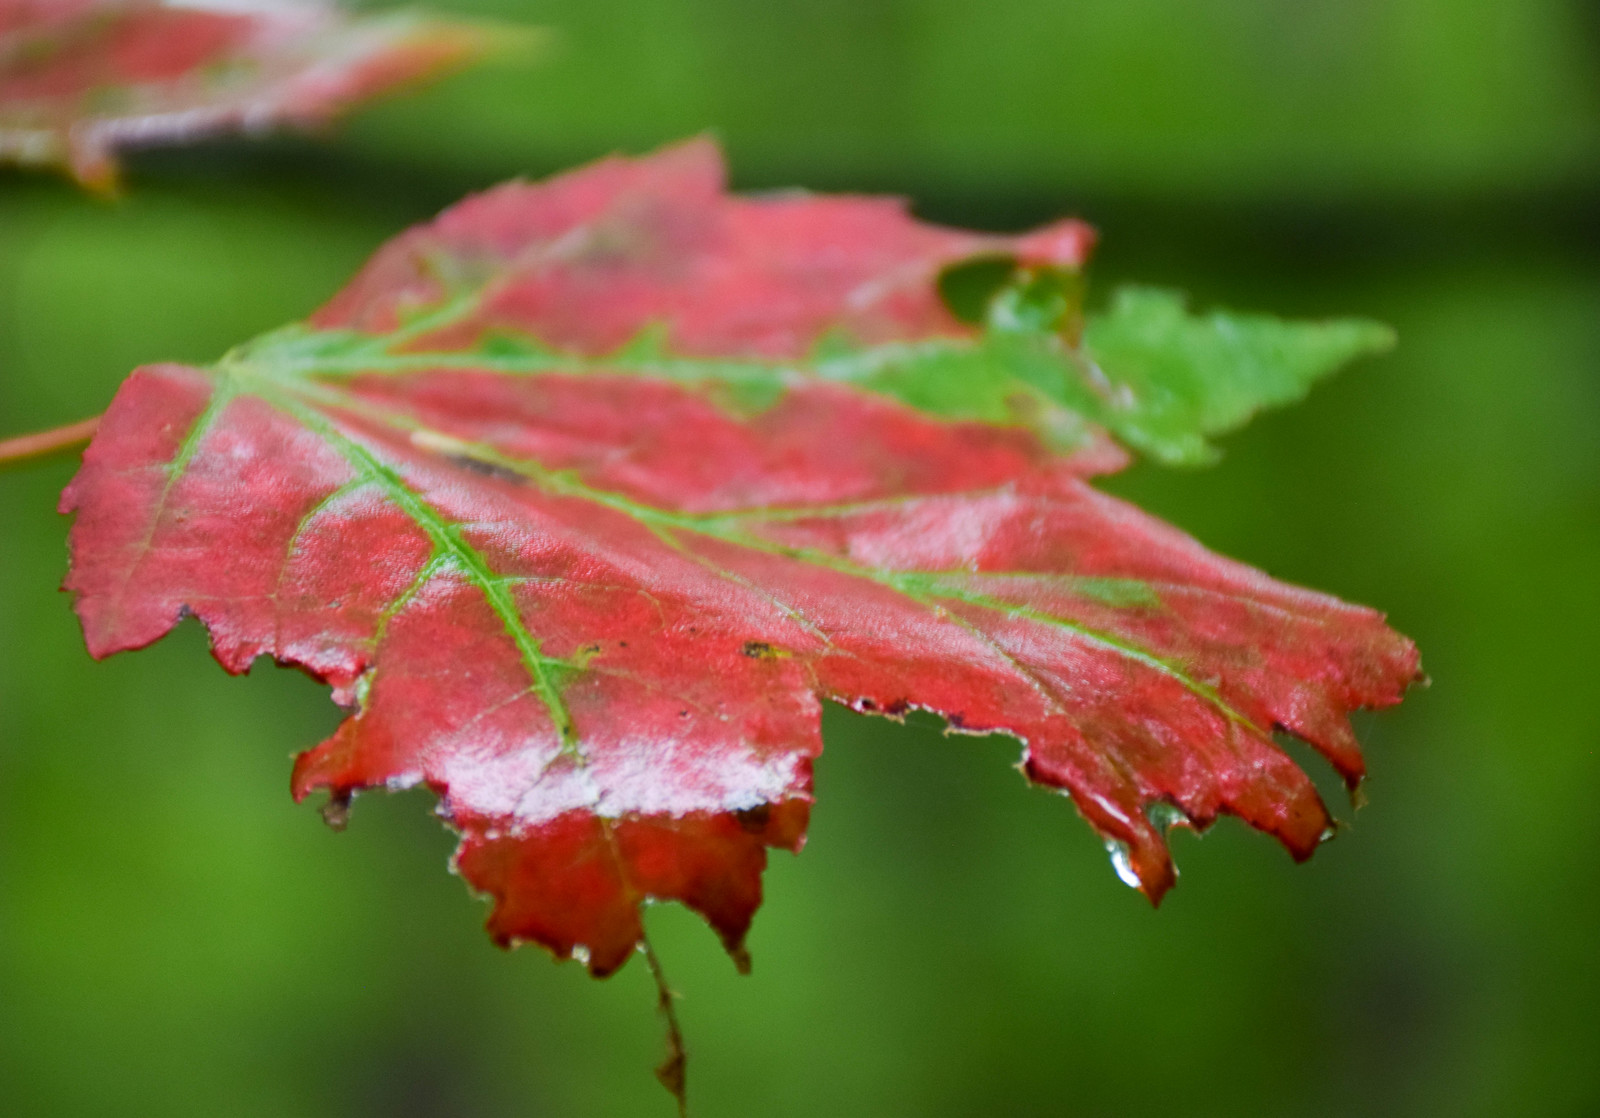 Fall photography tips to capture this closeup of a red maple leaf in the rain